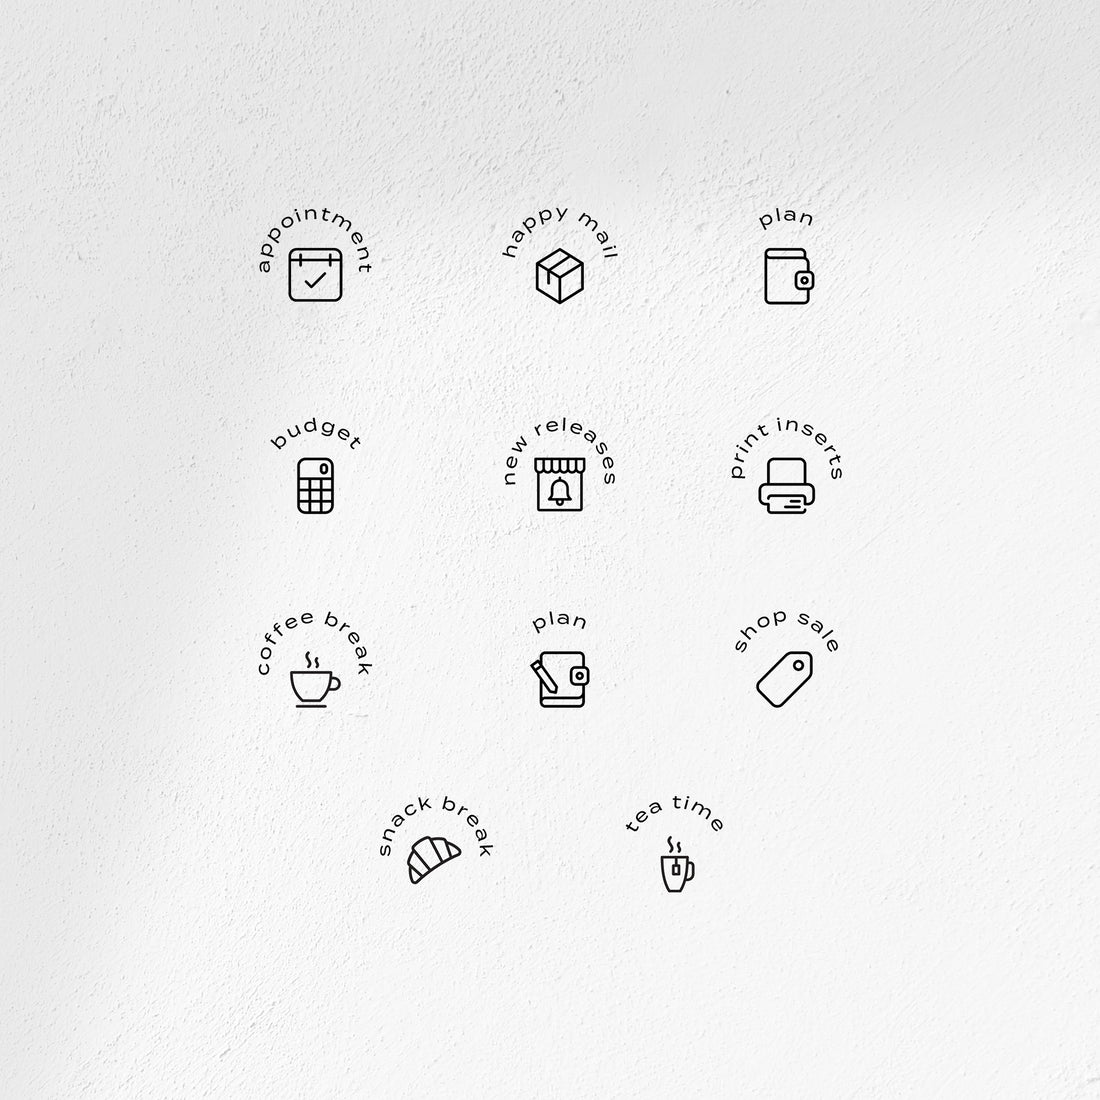 Arch Label Icons